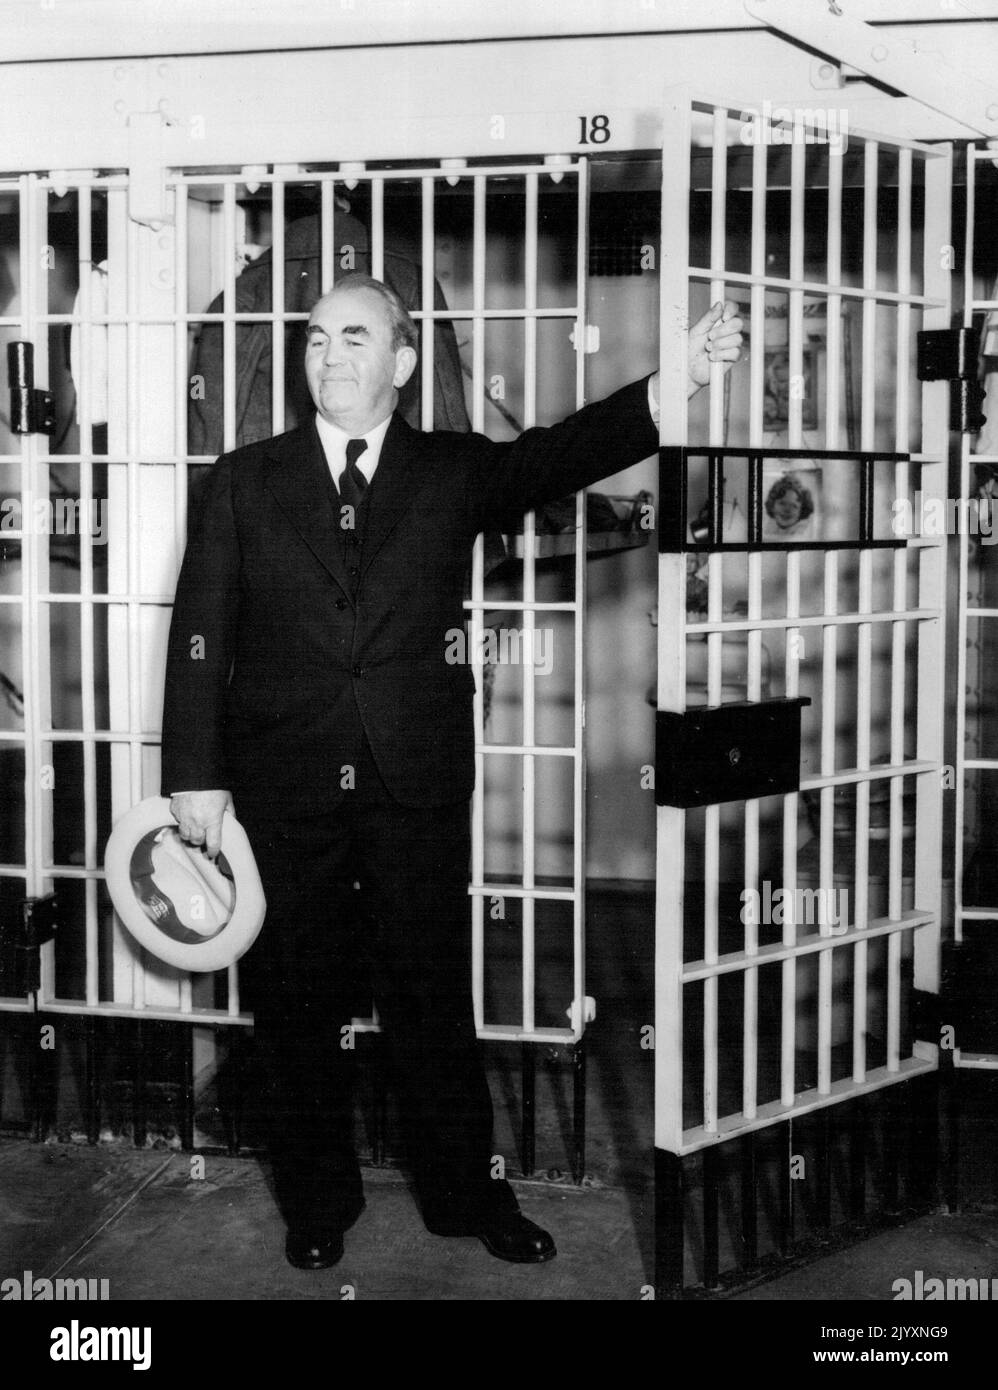 Where Mooney Will Live During Hearing - Thomas J. Mooney is pictured in front of the cell in the San Francisco jail where he will live during the hearing ordered by the state supreme court on his habeas corpus proceedings to gain vindication of the 1916 San Francisco Prepardenss day bombing. He was brought to San Francisco early today from San Quentin prison, where he has been serving a life sentence. Mooney was granted permission to attend the hearings. January 09, 1935. (Photo by Associated Press Photo). Stock Photo